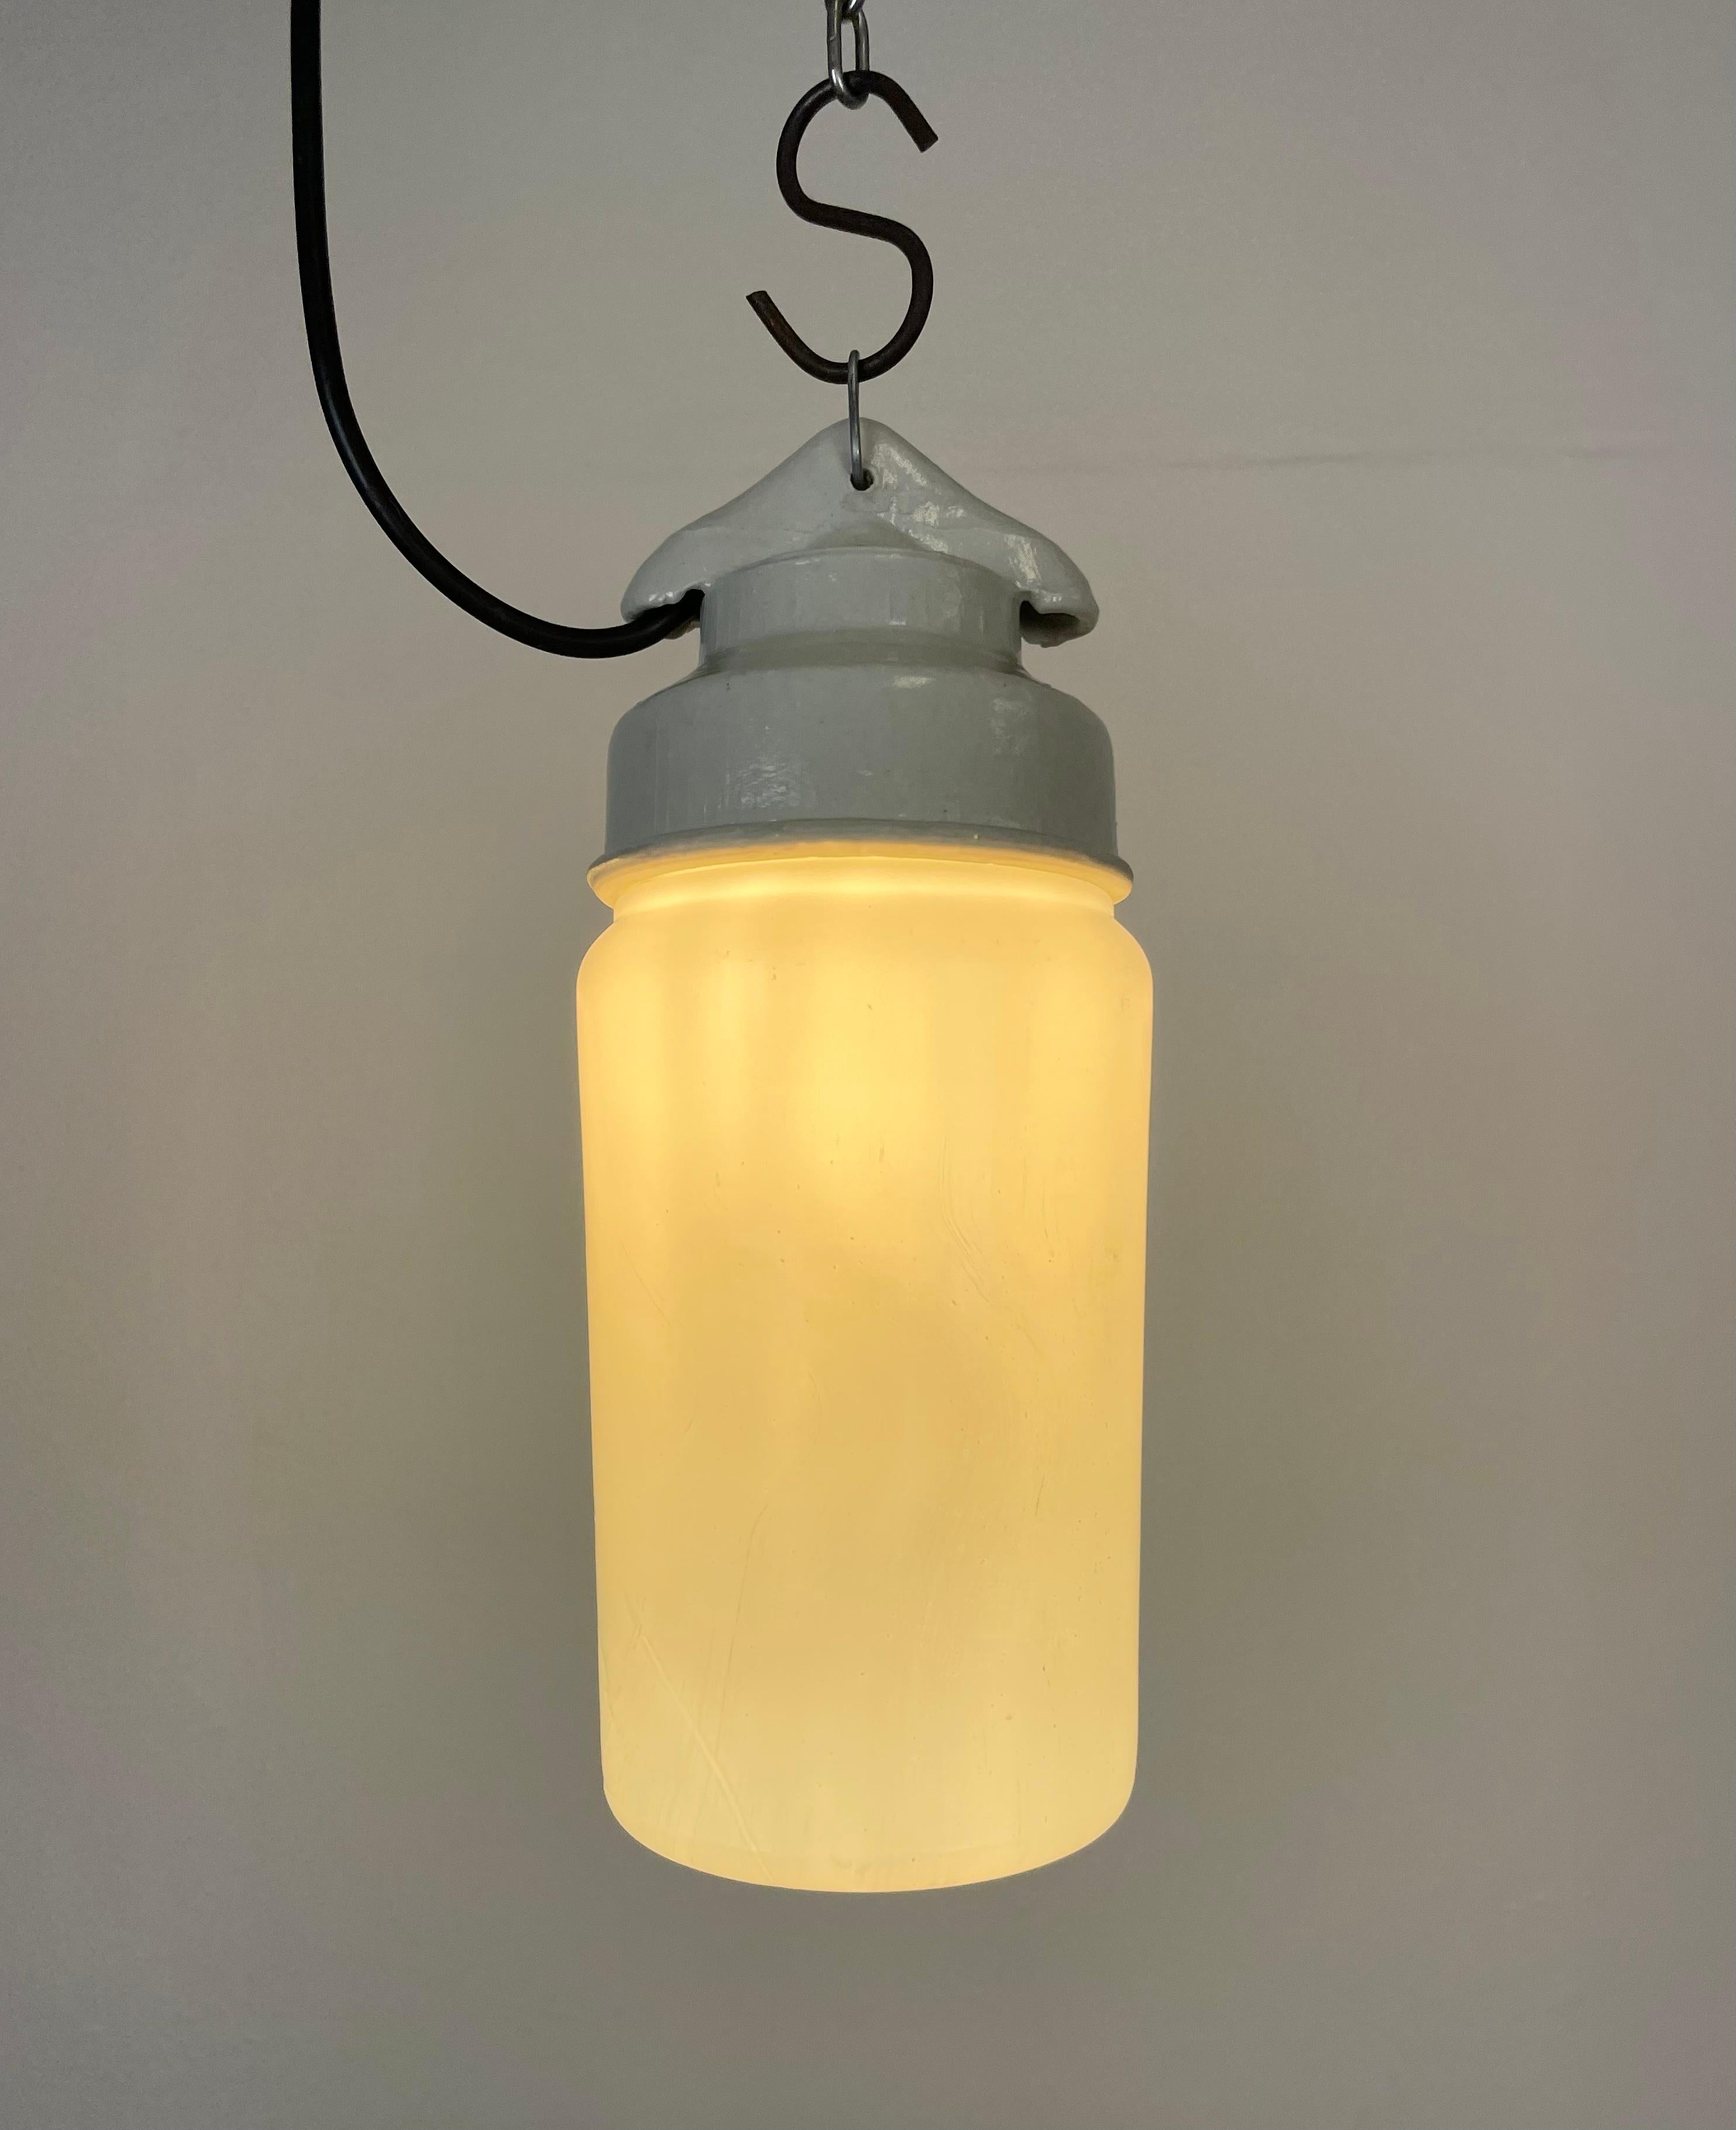 Industrial White Porcelain Pendant Light with Milk Glass, 1970s For Sale 3